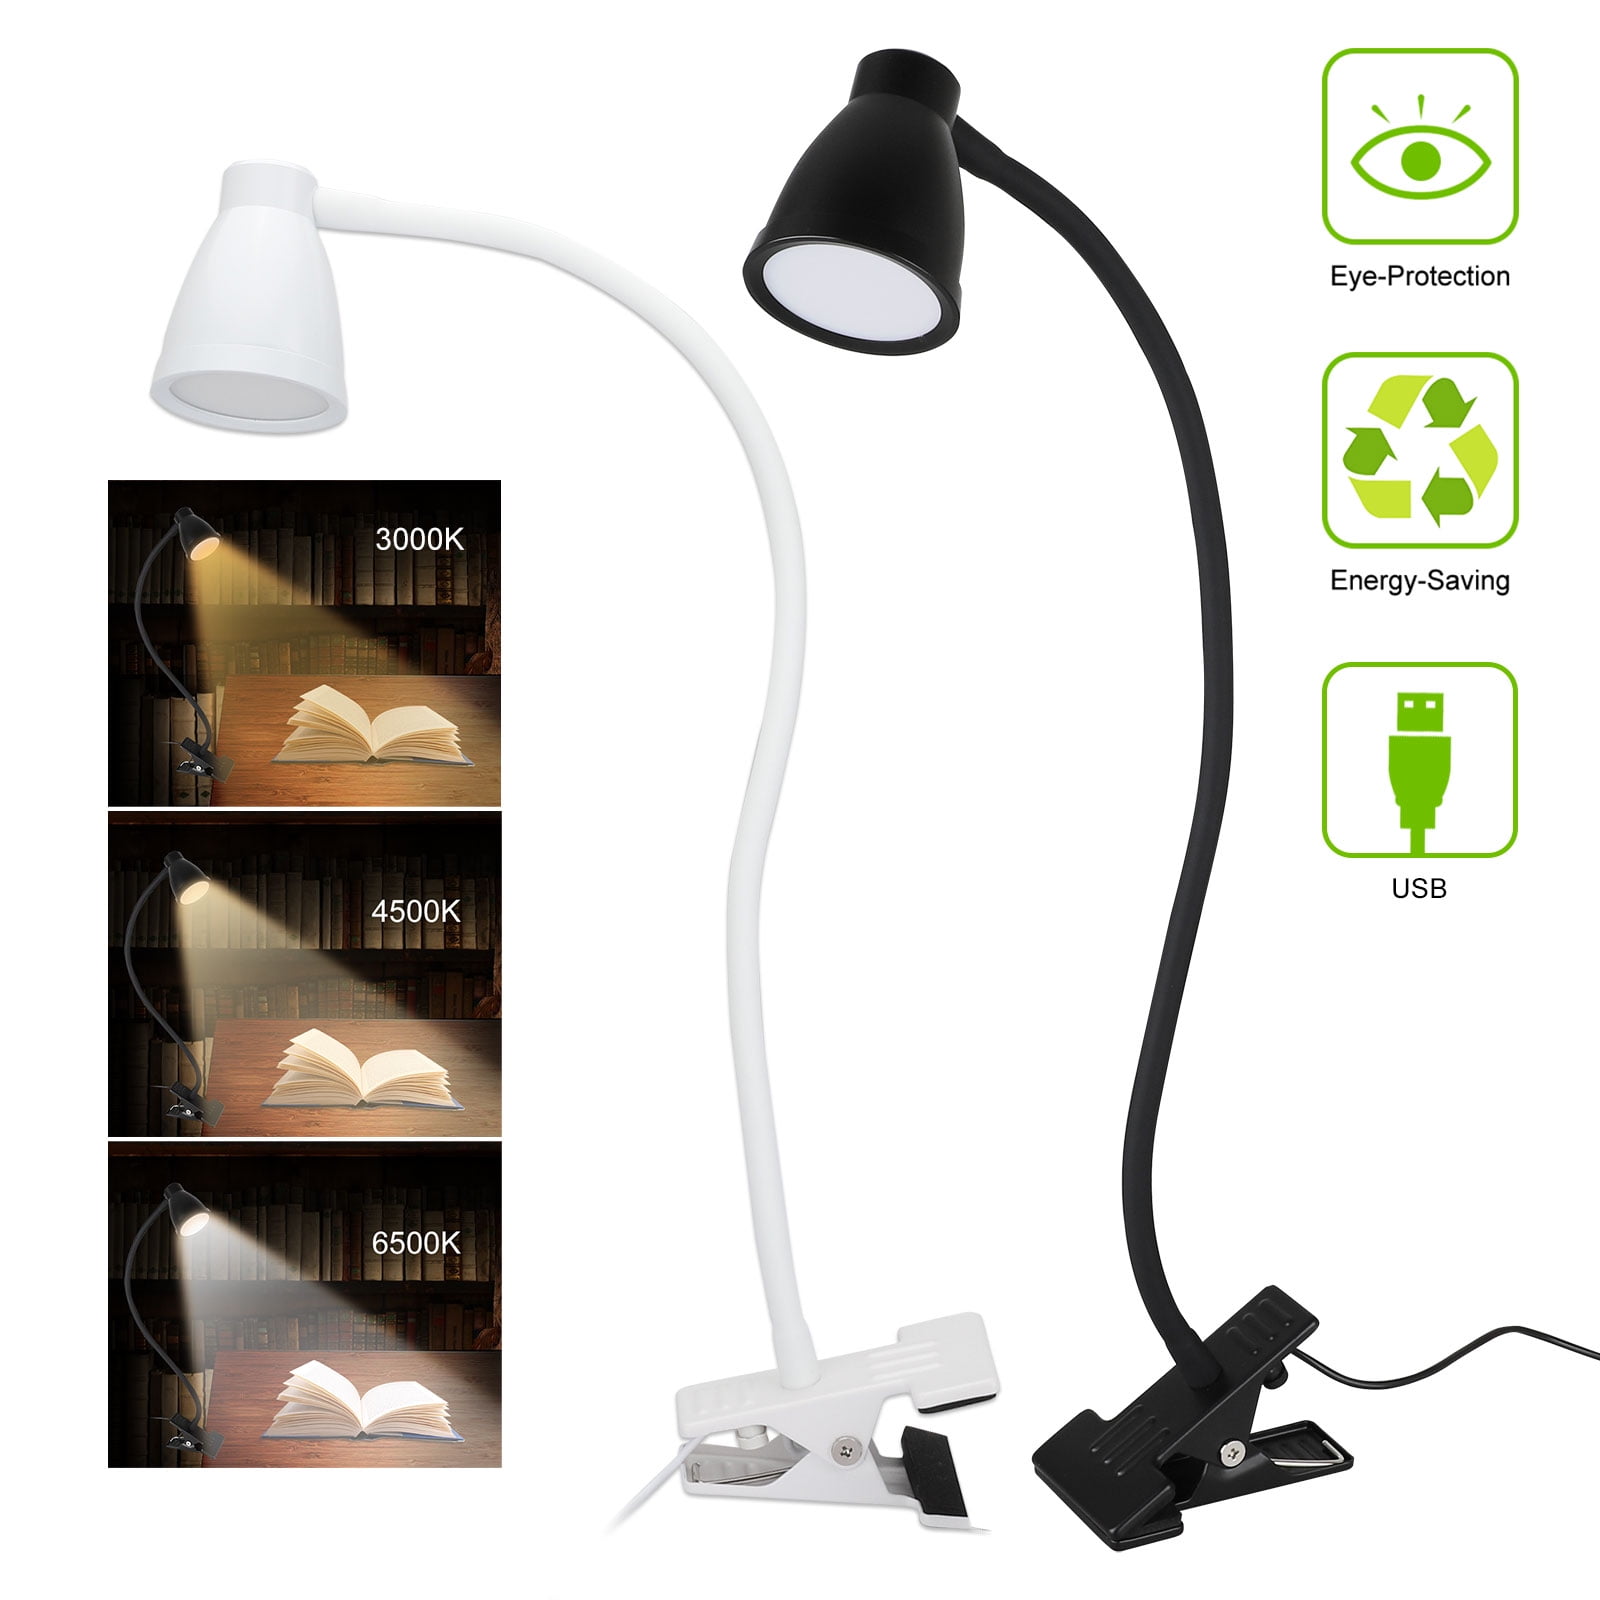 LED USB Dimmable Clip On Reading Light for Laptop Eye Care Brightness Notebook Piano Bed Headboard Desk Portable Night Light 